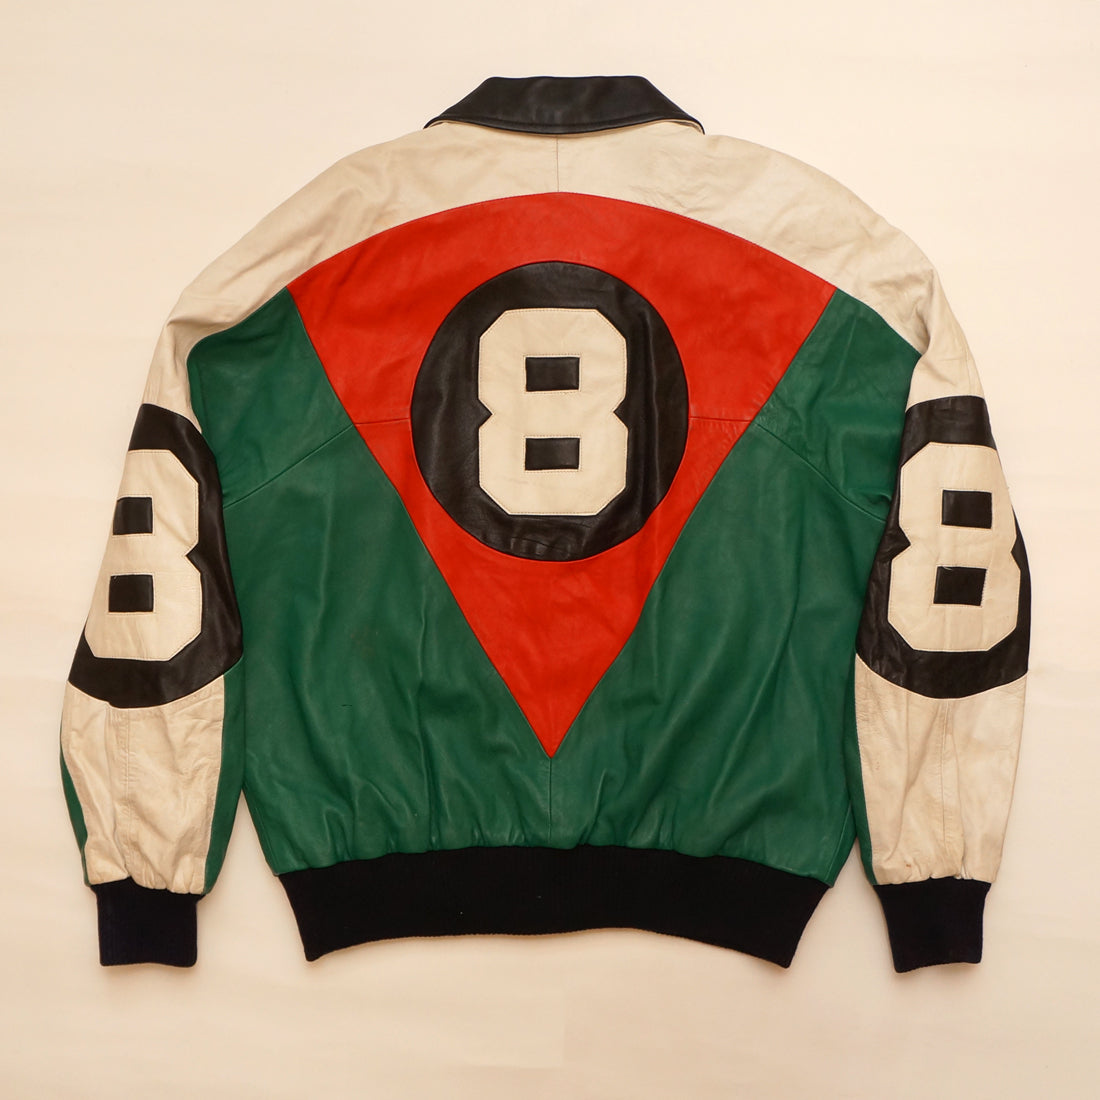 Vintage Red, white and Green Leather "8 Ball" Jacket By Michael Hoban